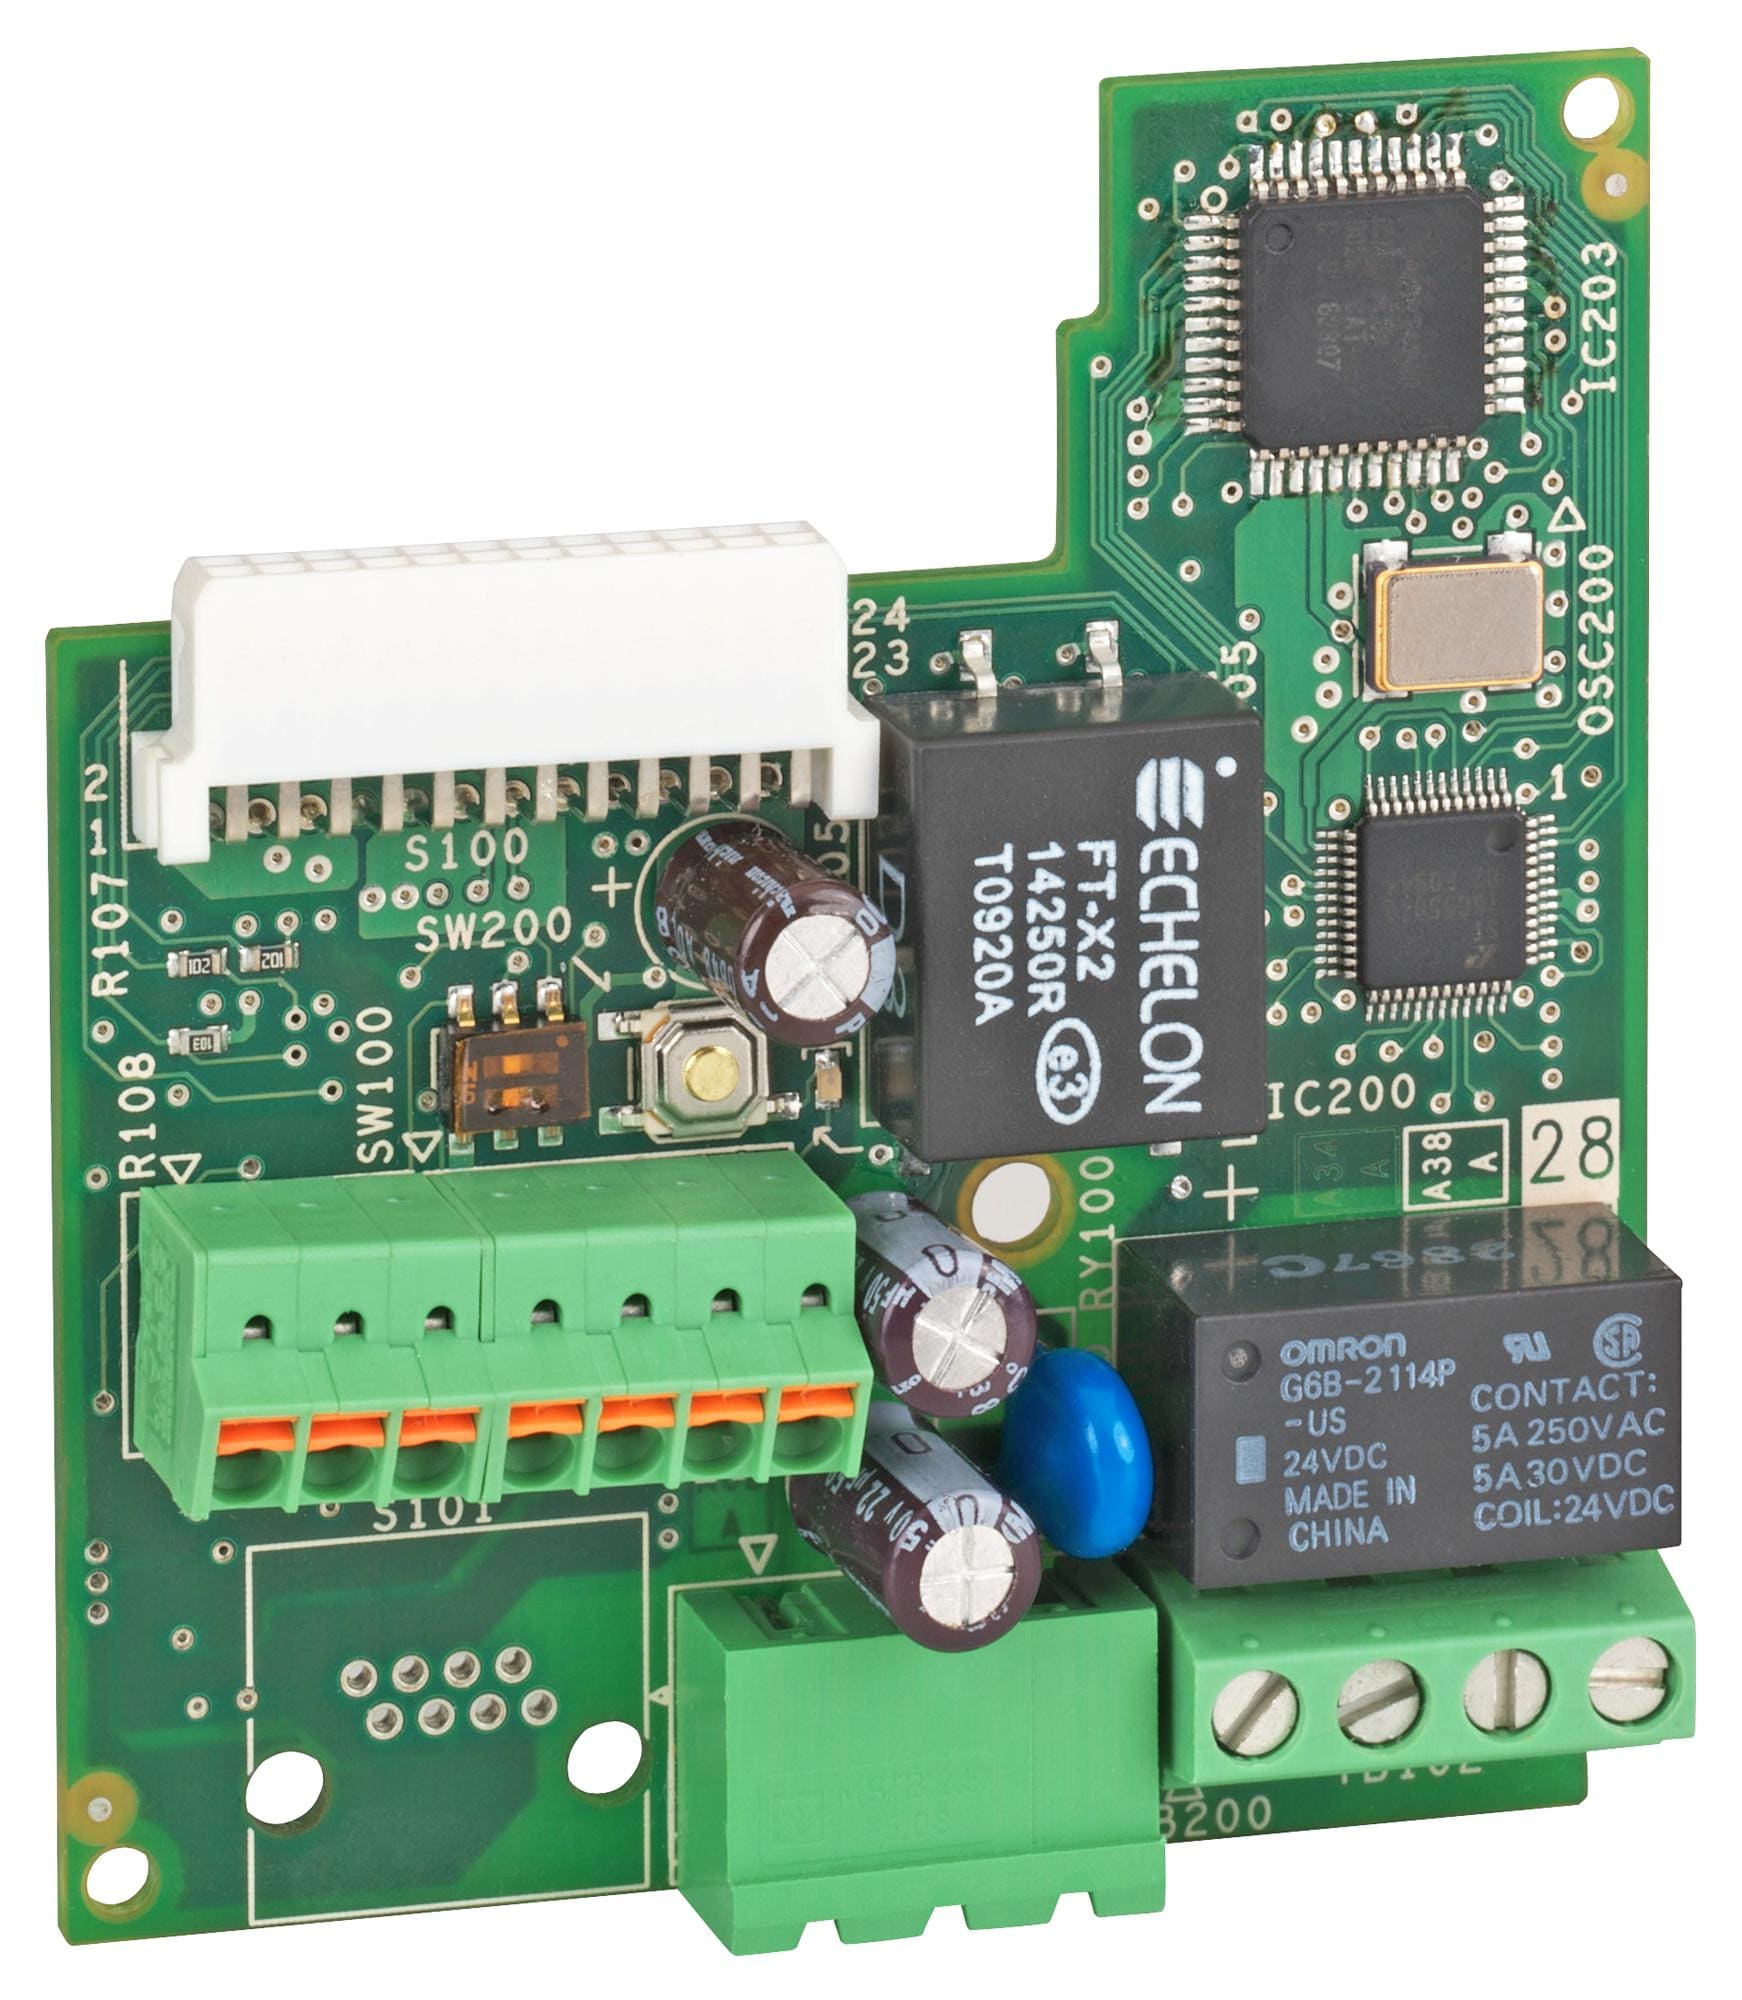 SCHNEIDER ELECTRIC Accessories VW3A21212 COMMUNICATION CARD, VARIABLE SPEED DRIVE SCHNEIDER ELECTRIC 3110660 VW3A21212